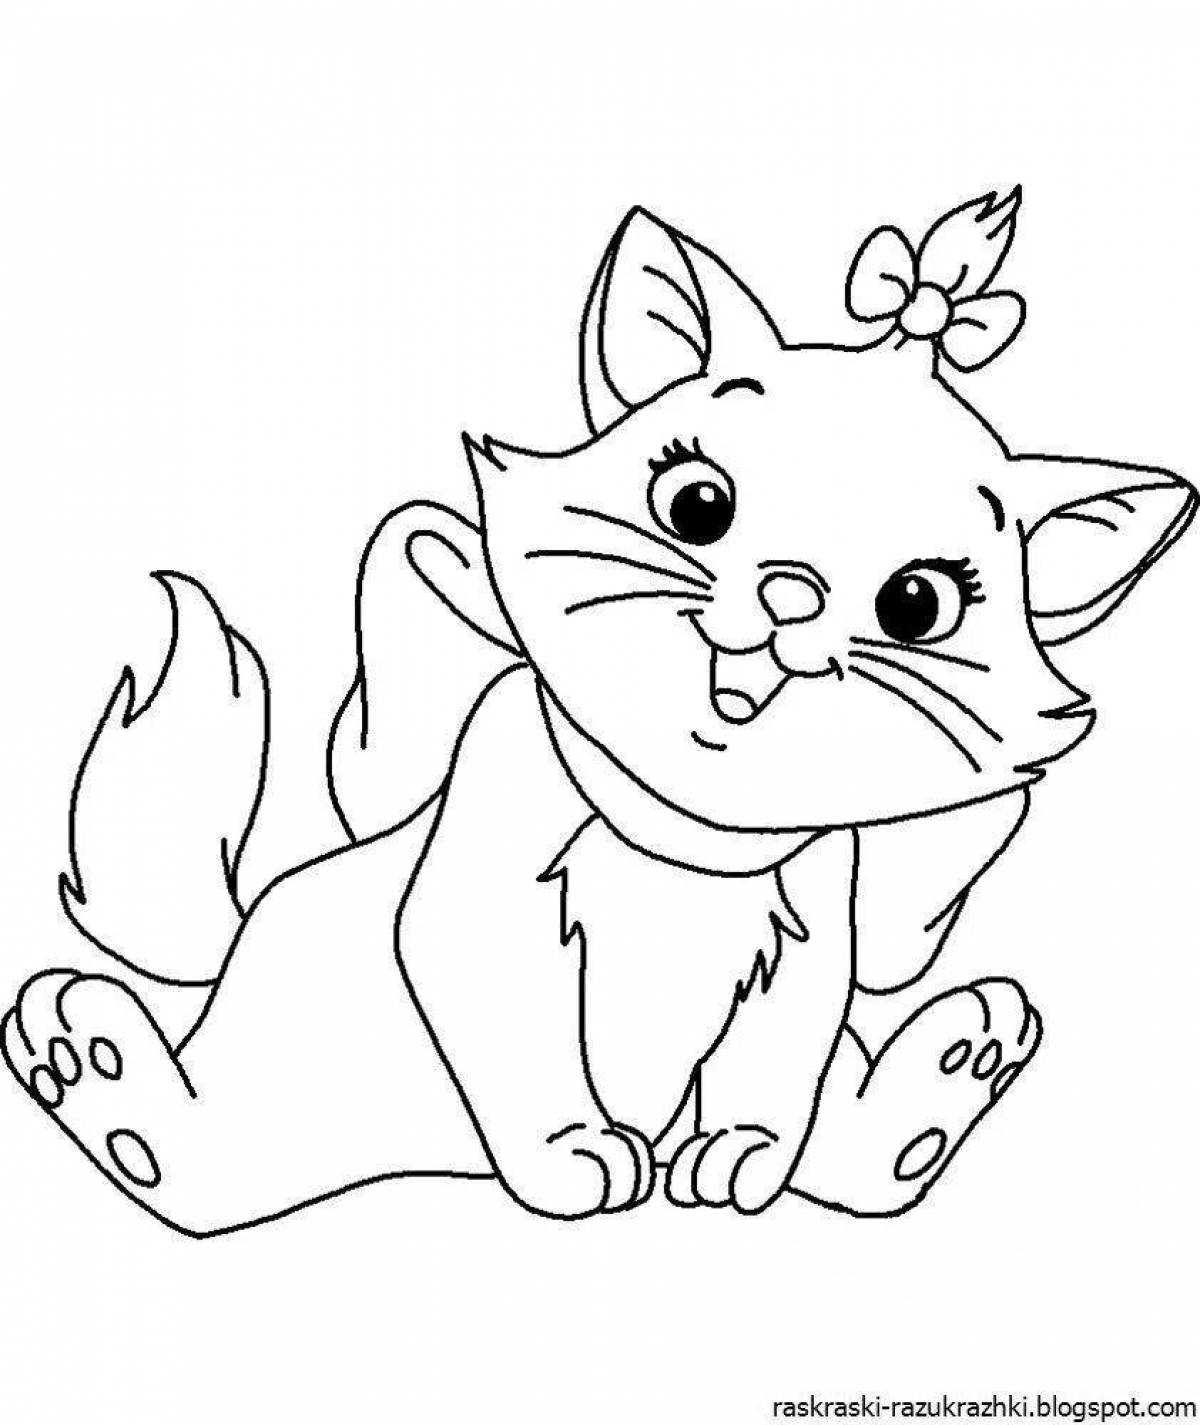 Coloring page for children 